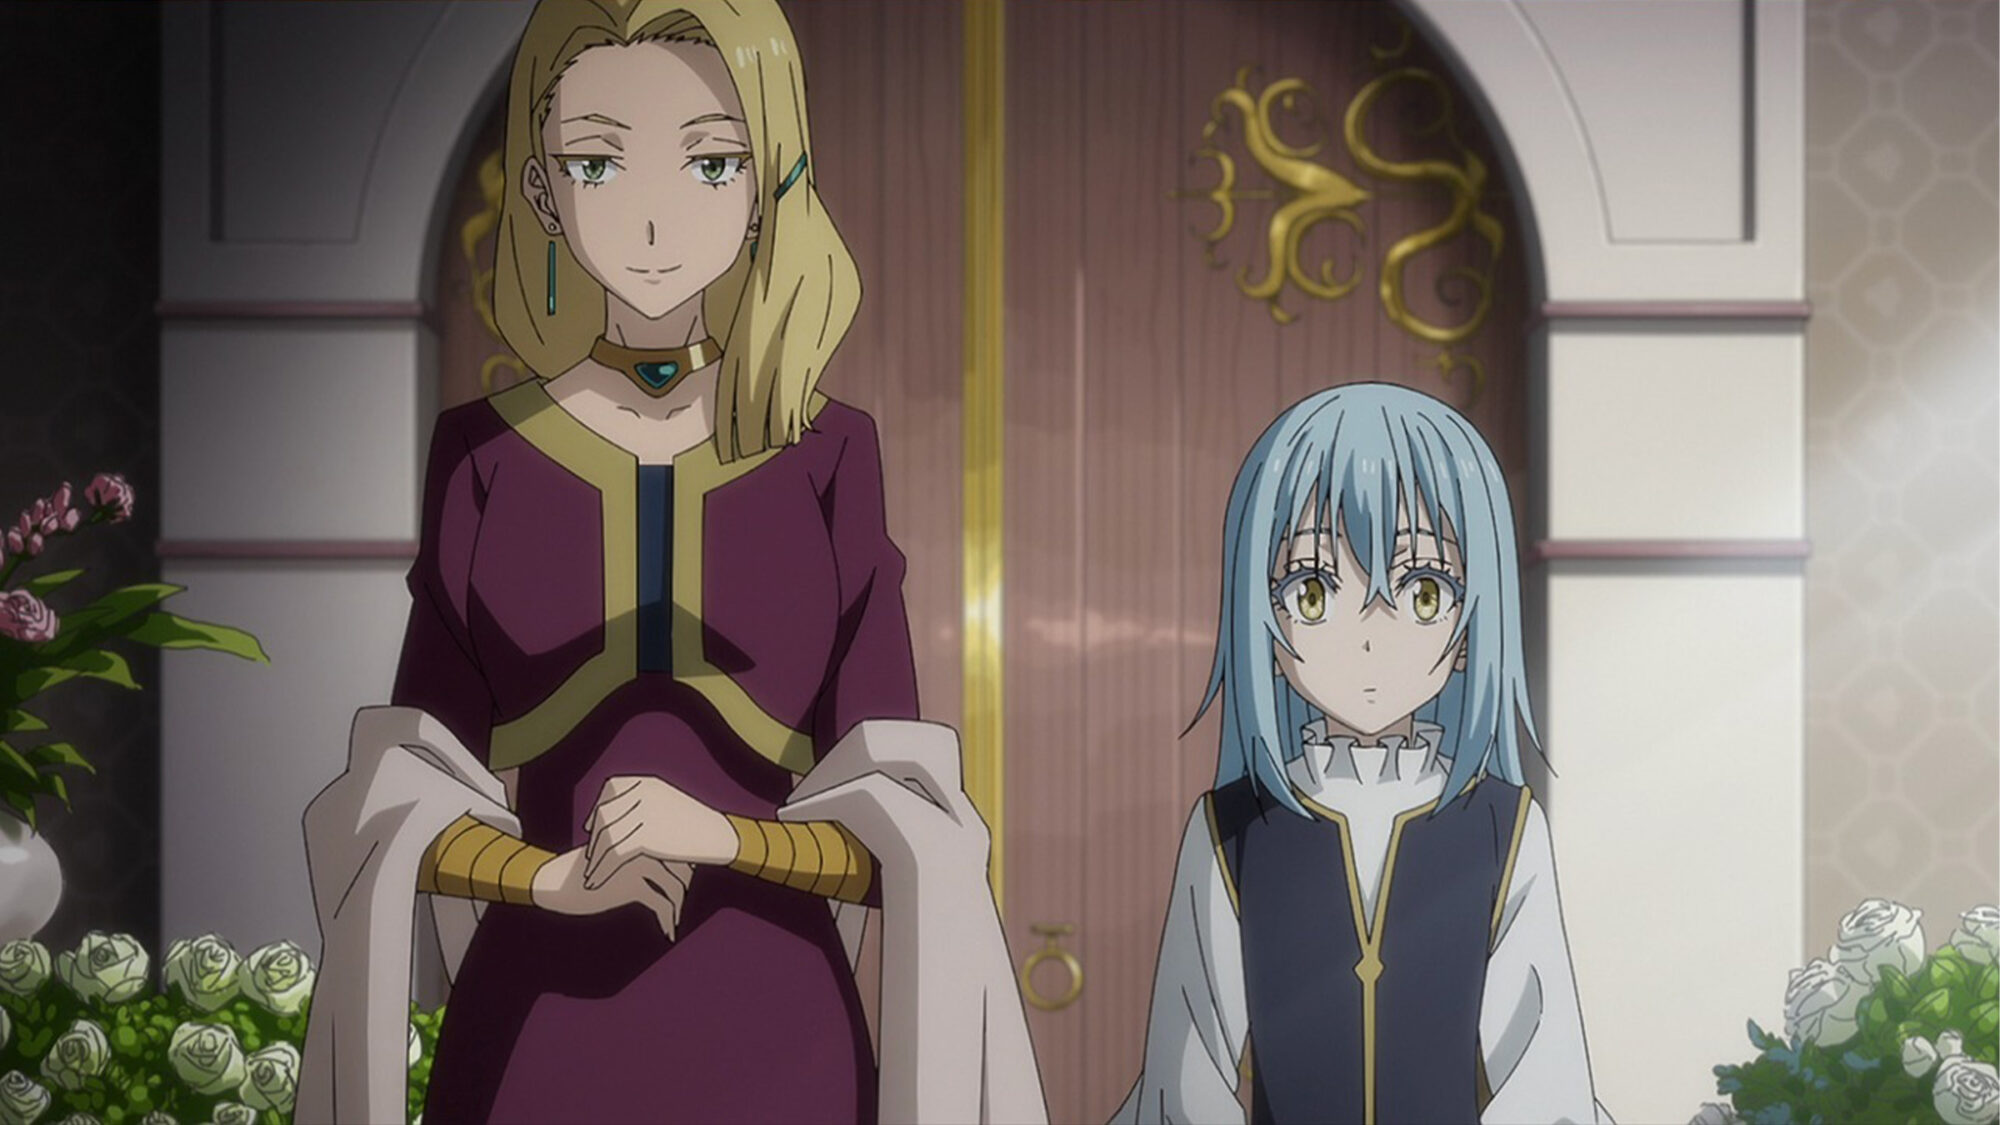 That Time I Got Reincarnated as a Slime Side Story Anime Reveals